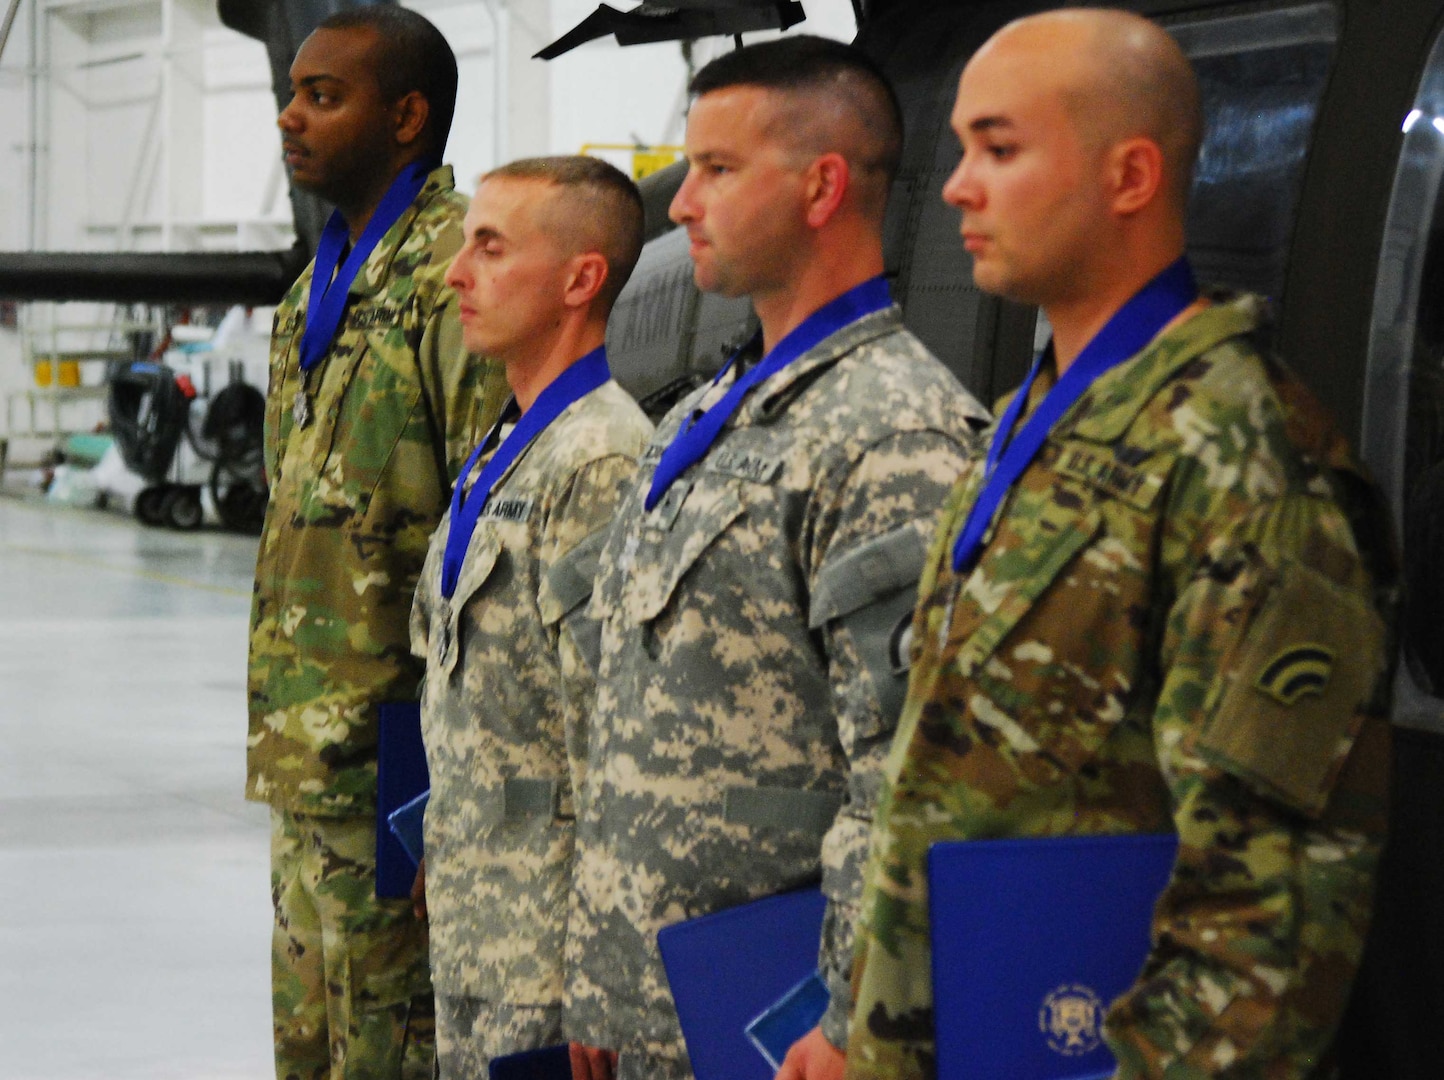 Four New York Army National Guard Soldiers who received New York's highest medal for heroism, the Medal for Valor, stand in formation during award ceremonies on Sunday, June 4, 2017 at Army Aviation Support Facility # 1 in Ronkonkoma, N.Y. The men were recognized for rescuing the pilot of a light plane which crashed in flames on Feb. 26. They are, from left, Sgt. Yaanique Scott, Warrant Officer Christopher Hansen, Chief Warrant Officer 2 Aaron Pacholk and Chief Warrant Officer 2 Ronald Ramirez.